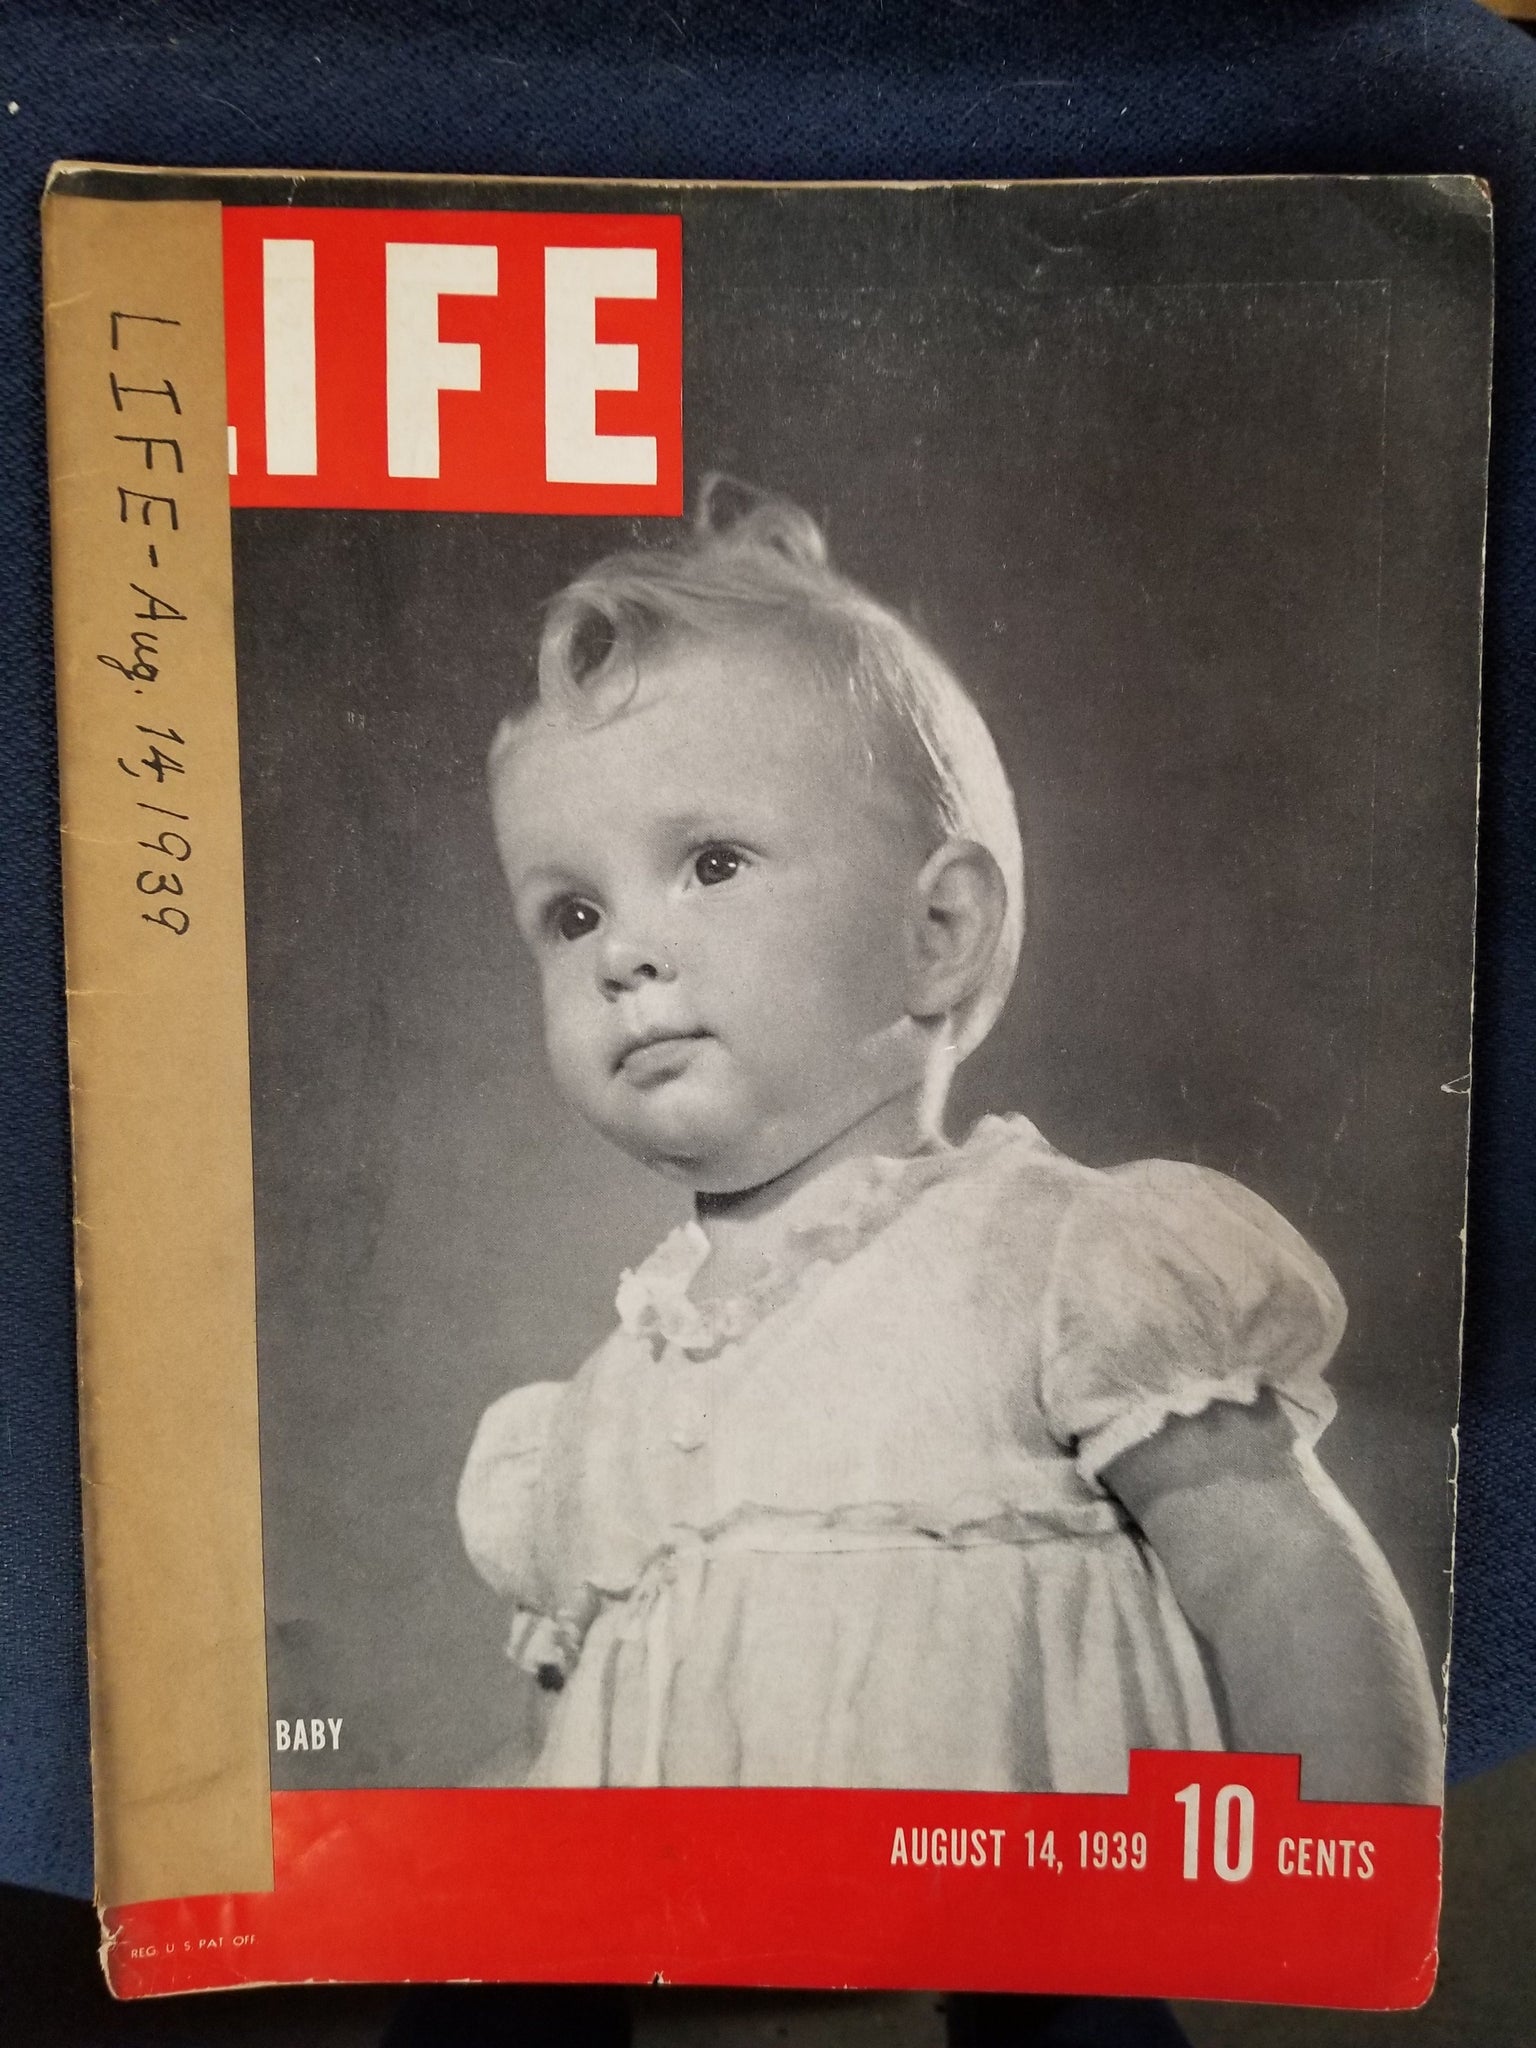 LIFE MAGAZINE - AUGUST 14, 1939  by Luce, Henry R.